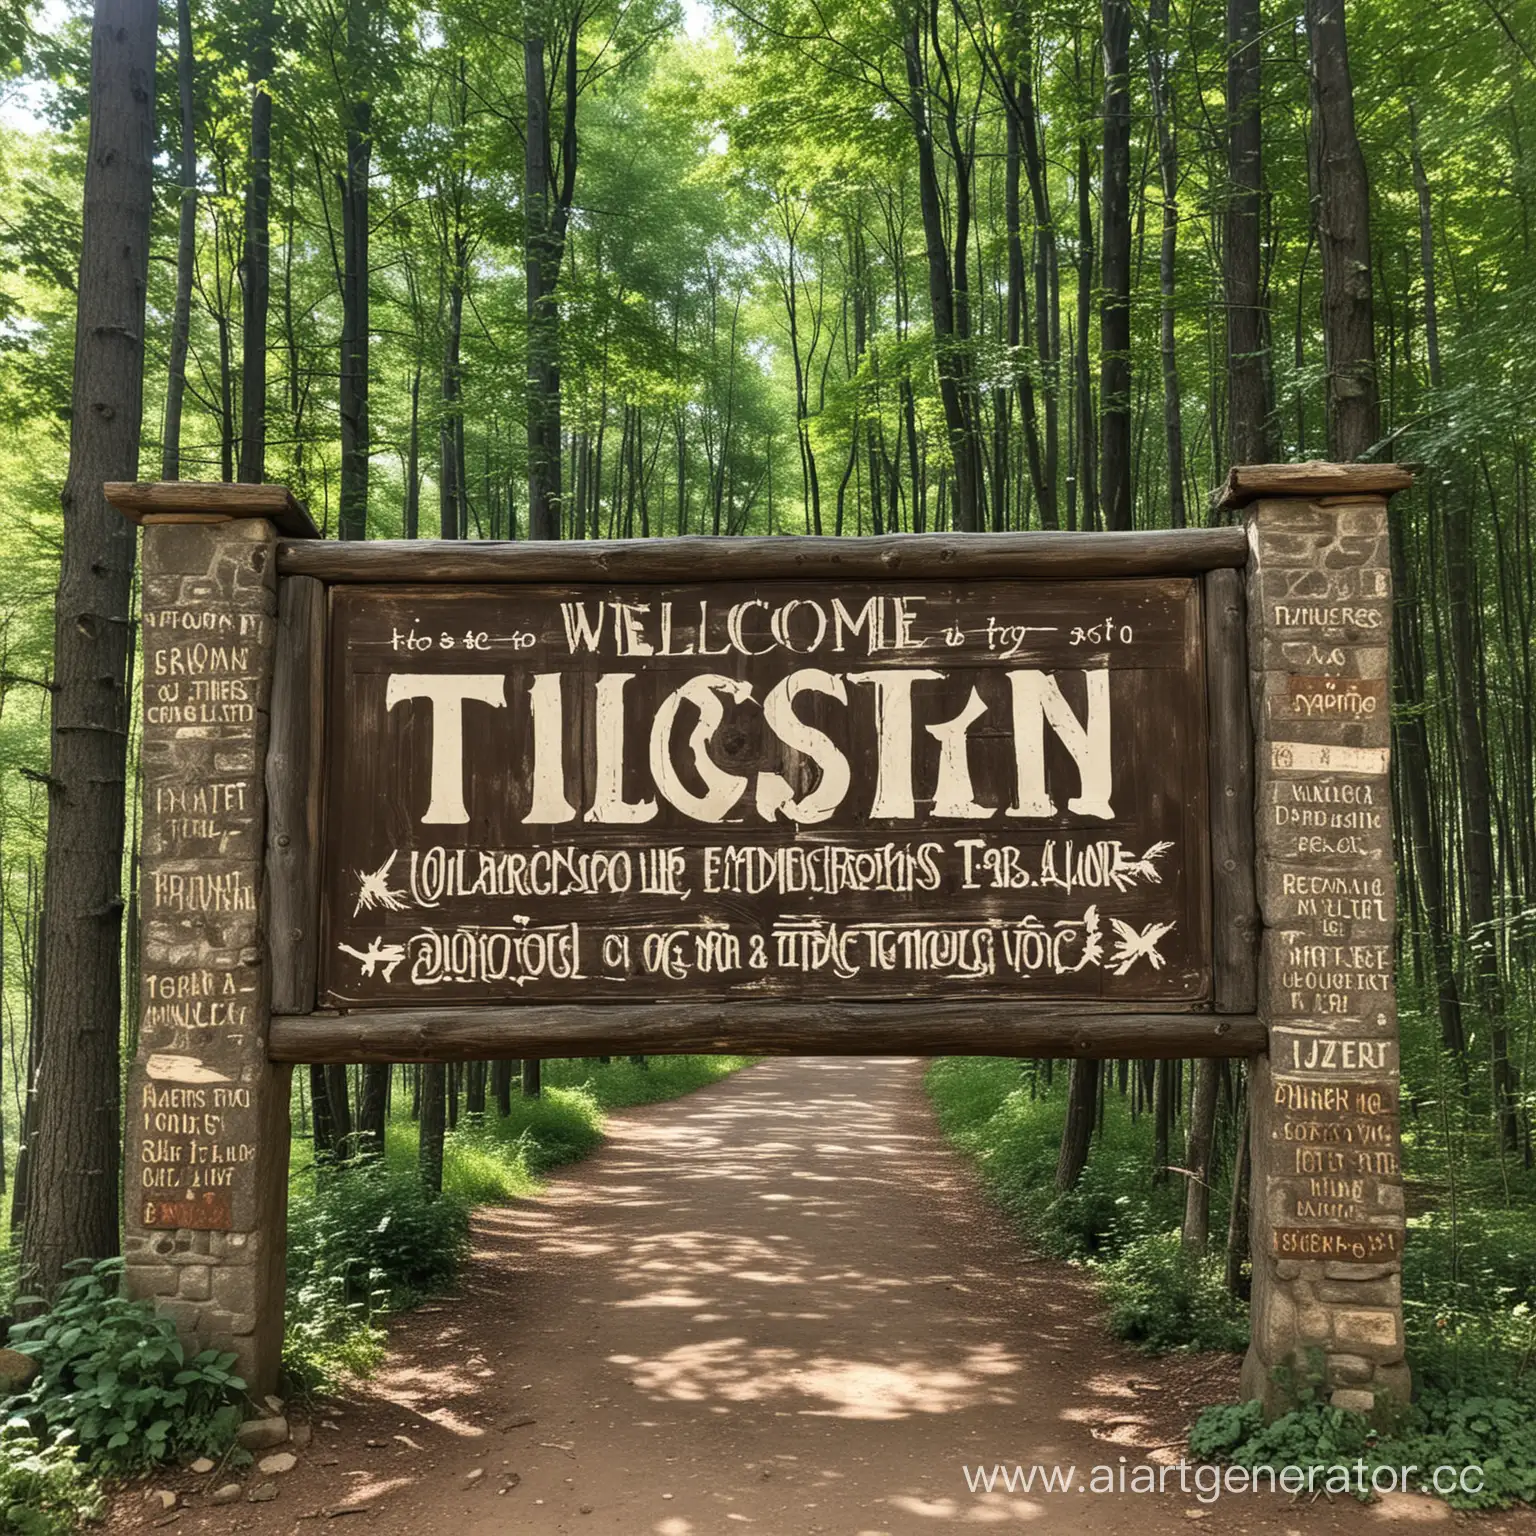 Entrance-Sign-to-Staran-Welcome-to-Tiltostans-Enchanted-Forest